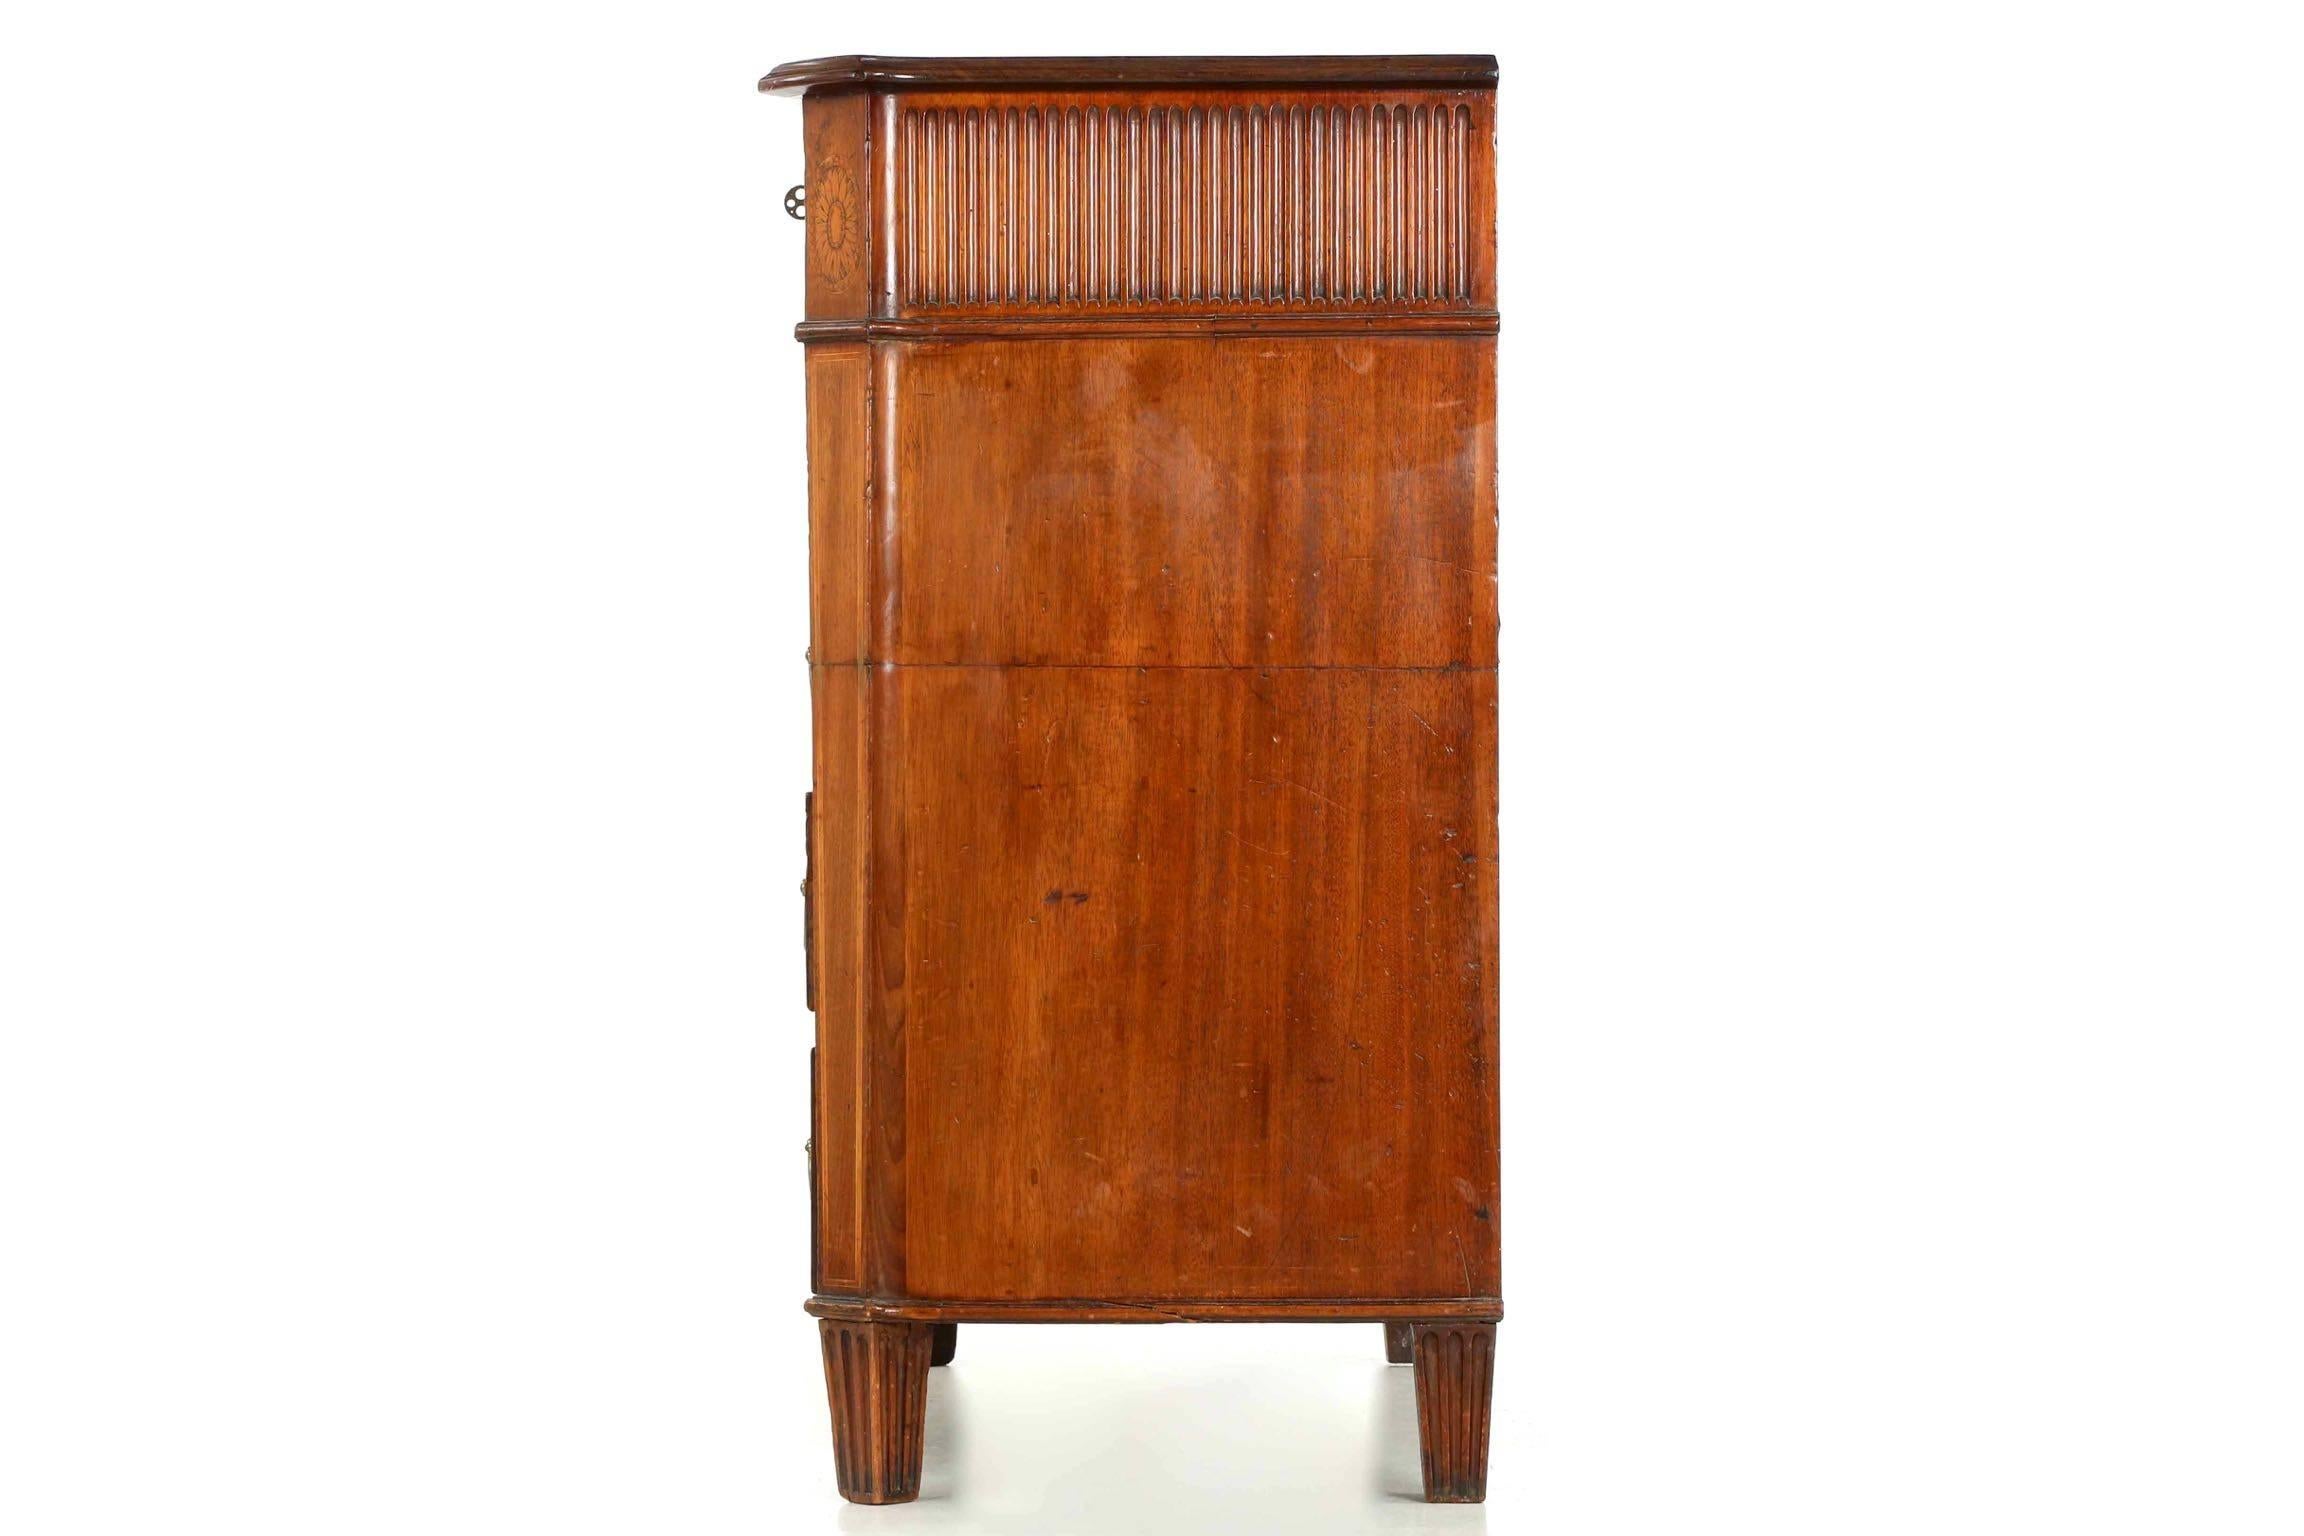 This most attractive Georgian chest of drawers retains an early and most pleasing cognac hue and burnished patina throughout, this particularly well developed on the top of the chest. This is a finely selected plank of mahogany with gorgeous